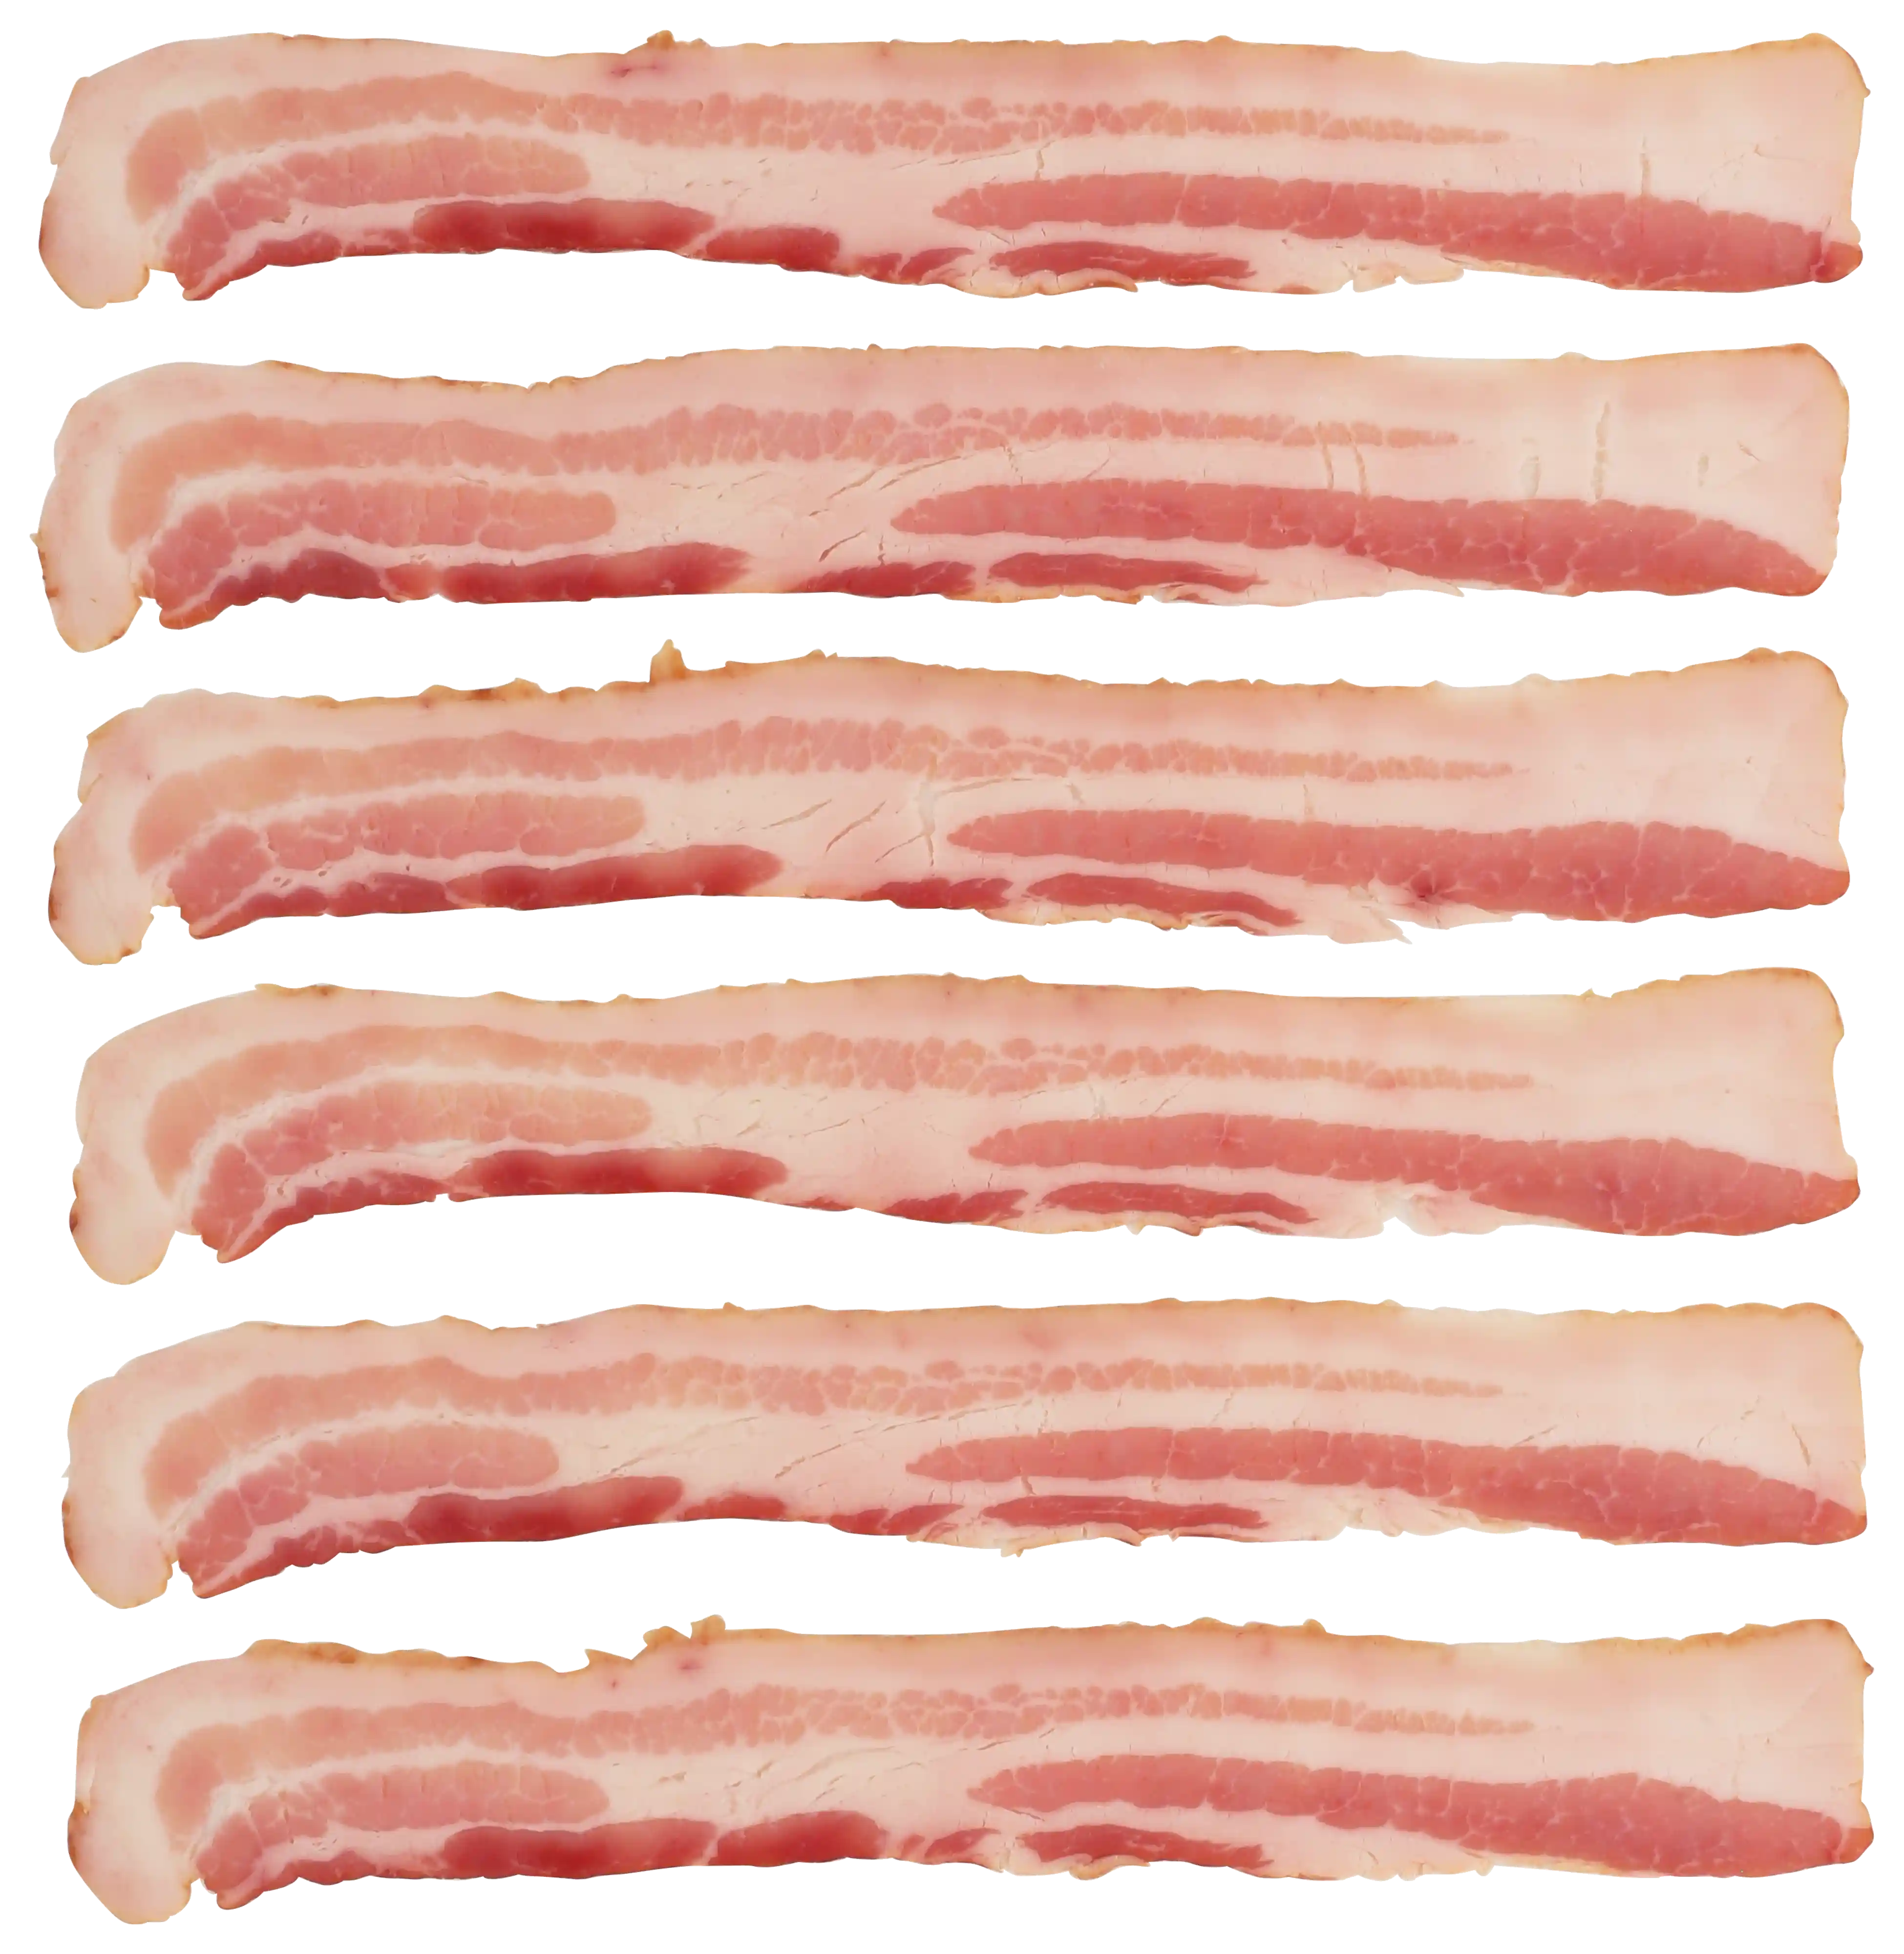 Wright® Brand Naturally Hickory Smoked Regular Sliced Bacon, Bulk, 15 Lbs, 14-18 Slices per Pound, Gas Flushed_image_21